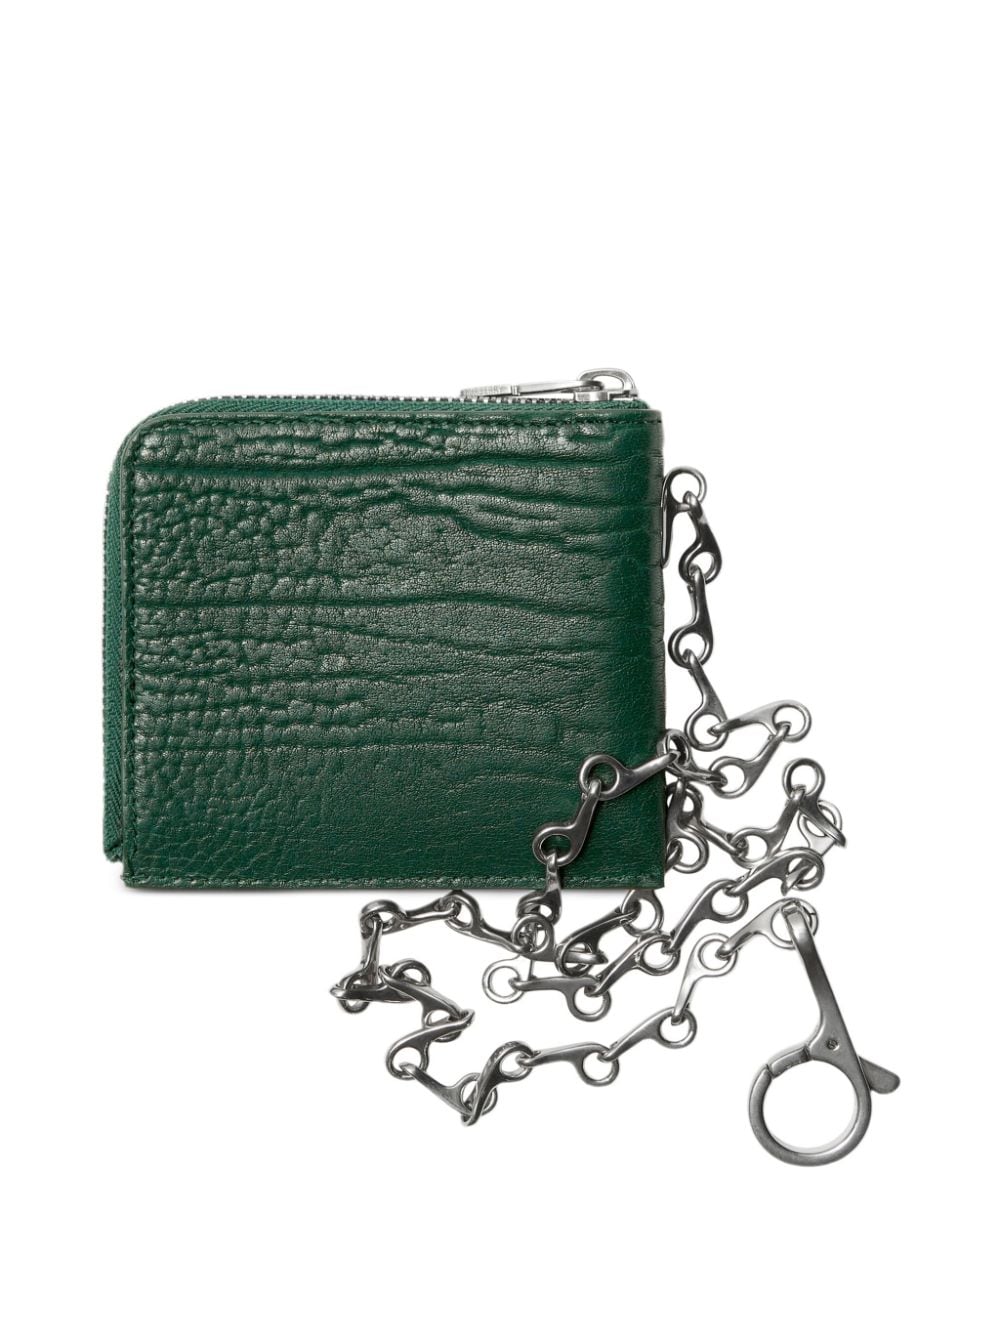 Burberry Equestrian Knight leather wallet - Groen